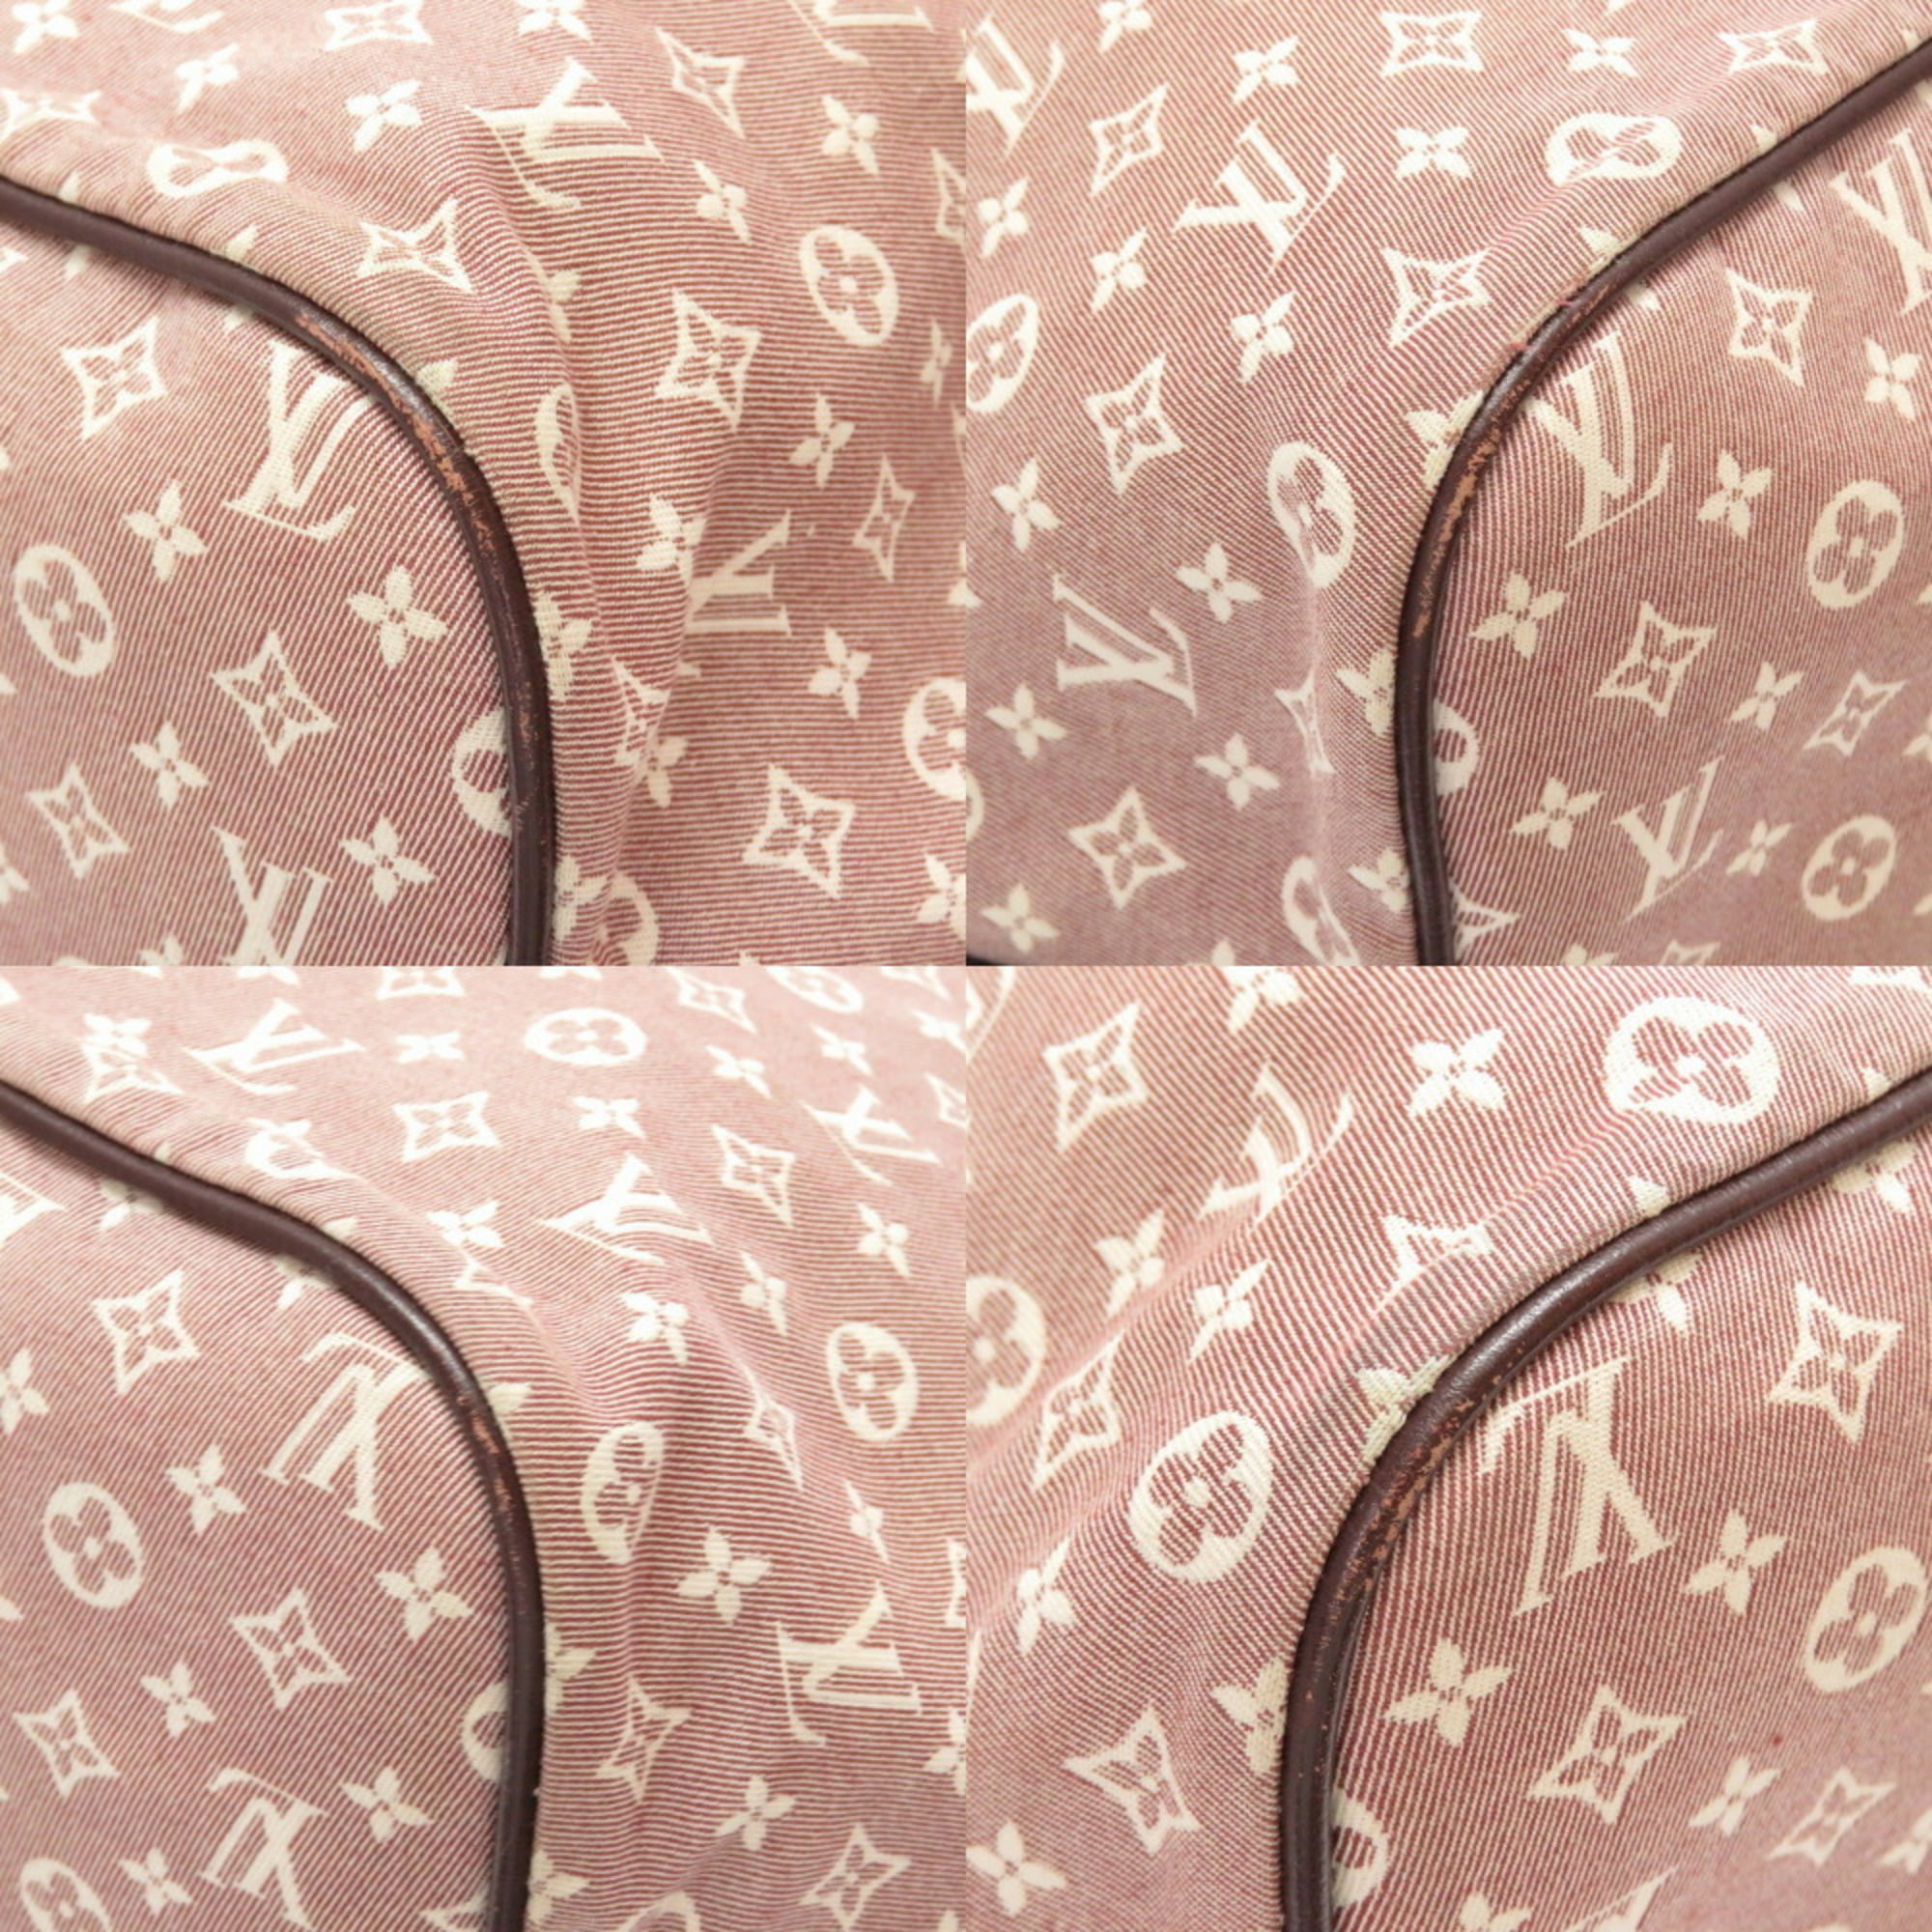 Louis-Vuitton-Monogram-Idylle-Neverfull-MM-Tote-Bag-Sepia-M40515 –  dct-ep_vintage luxury Store